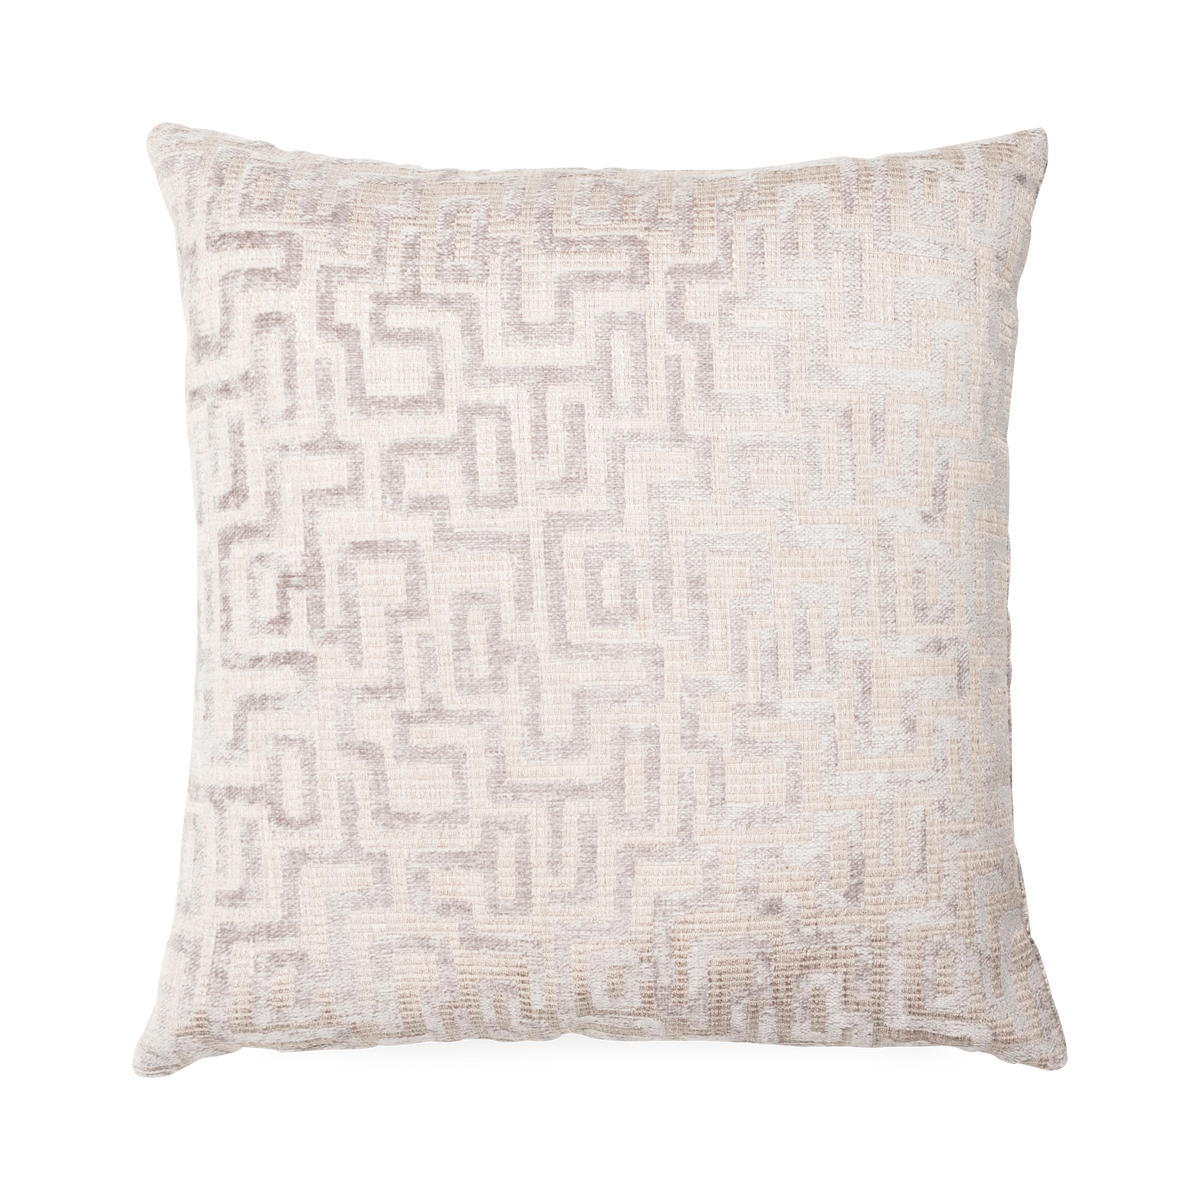 Defined by its intricate maze detailing and its slight velvet sheen, the Gateway Pillow adds an eye-catching design that provides a creative and unique approach to your bedding and